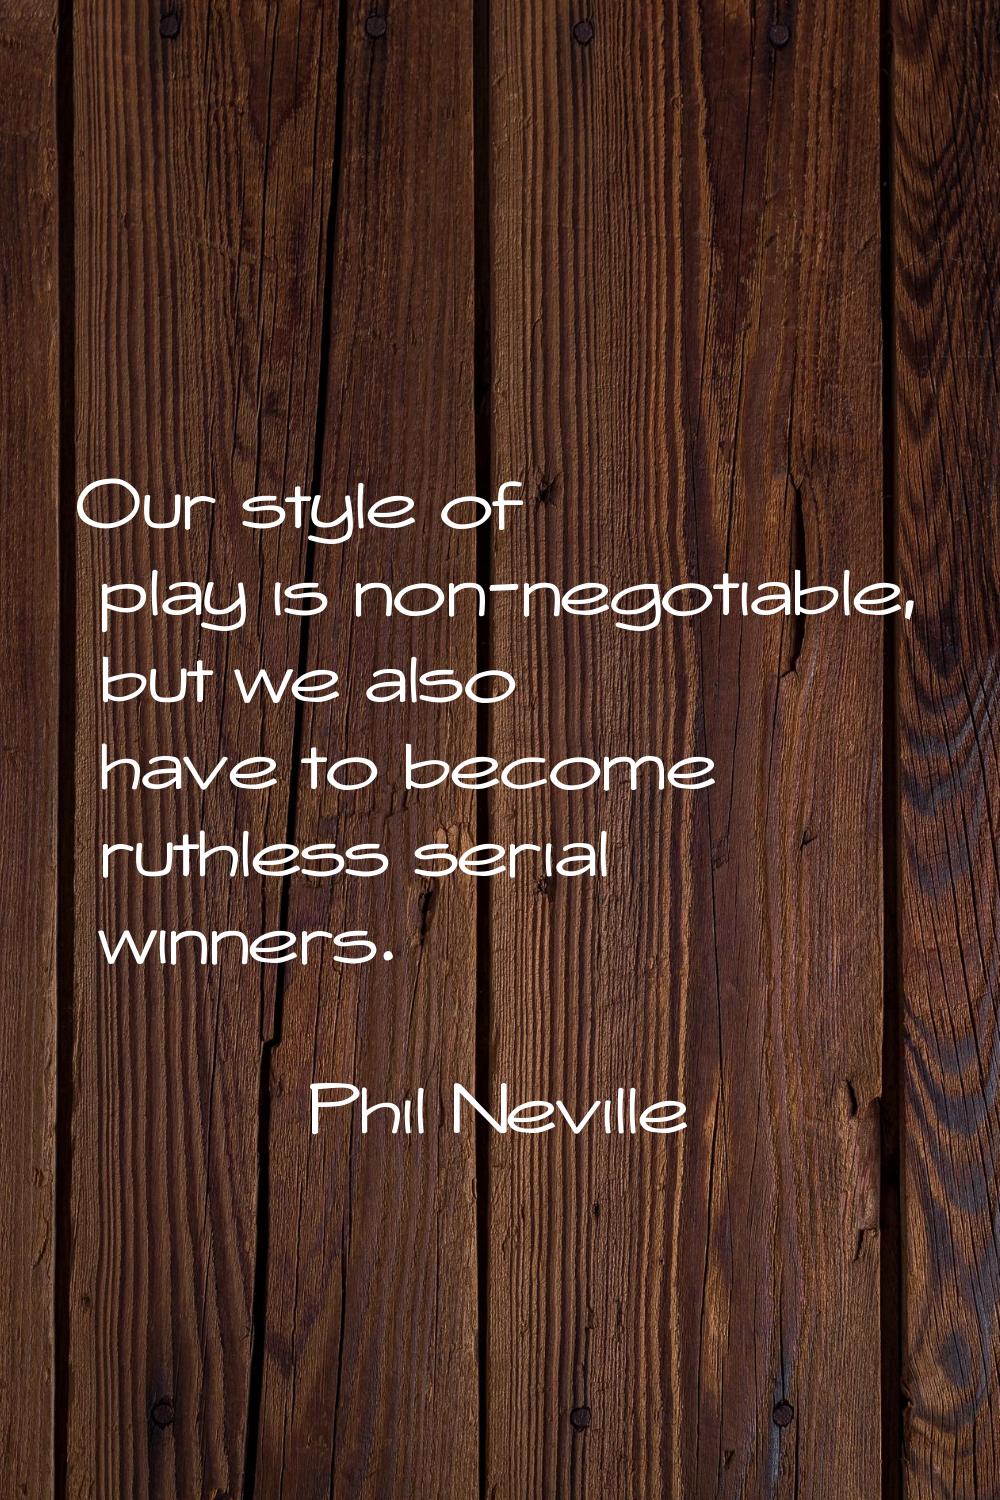 Our style of play is non-negotiable, but we also have to become ruthless serial winners.